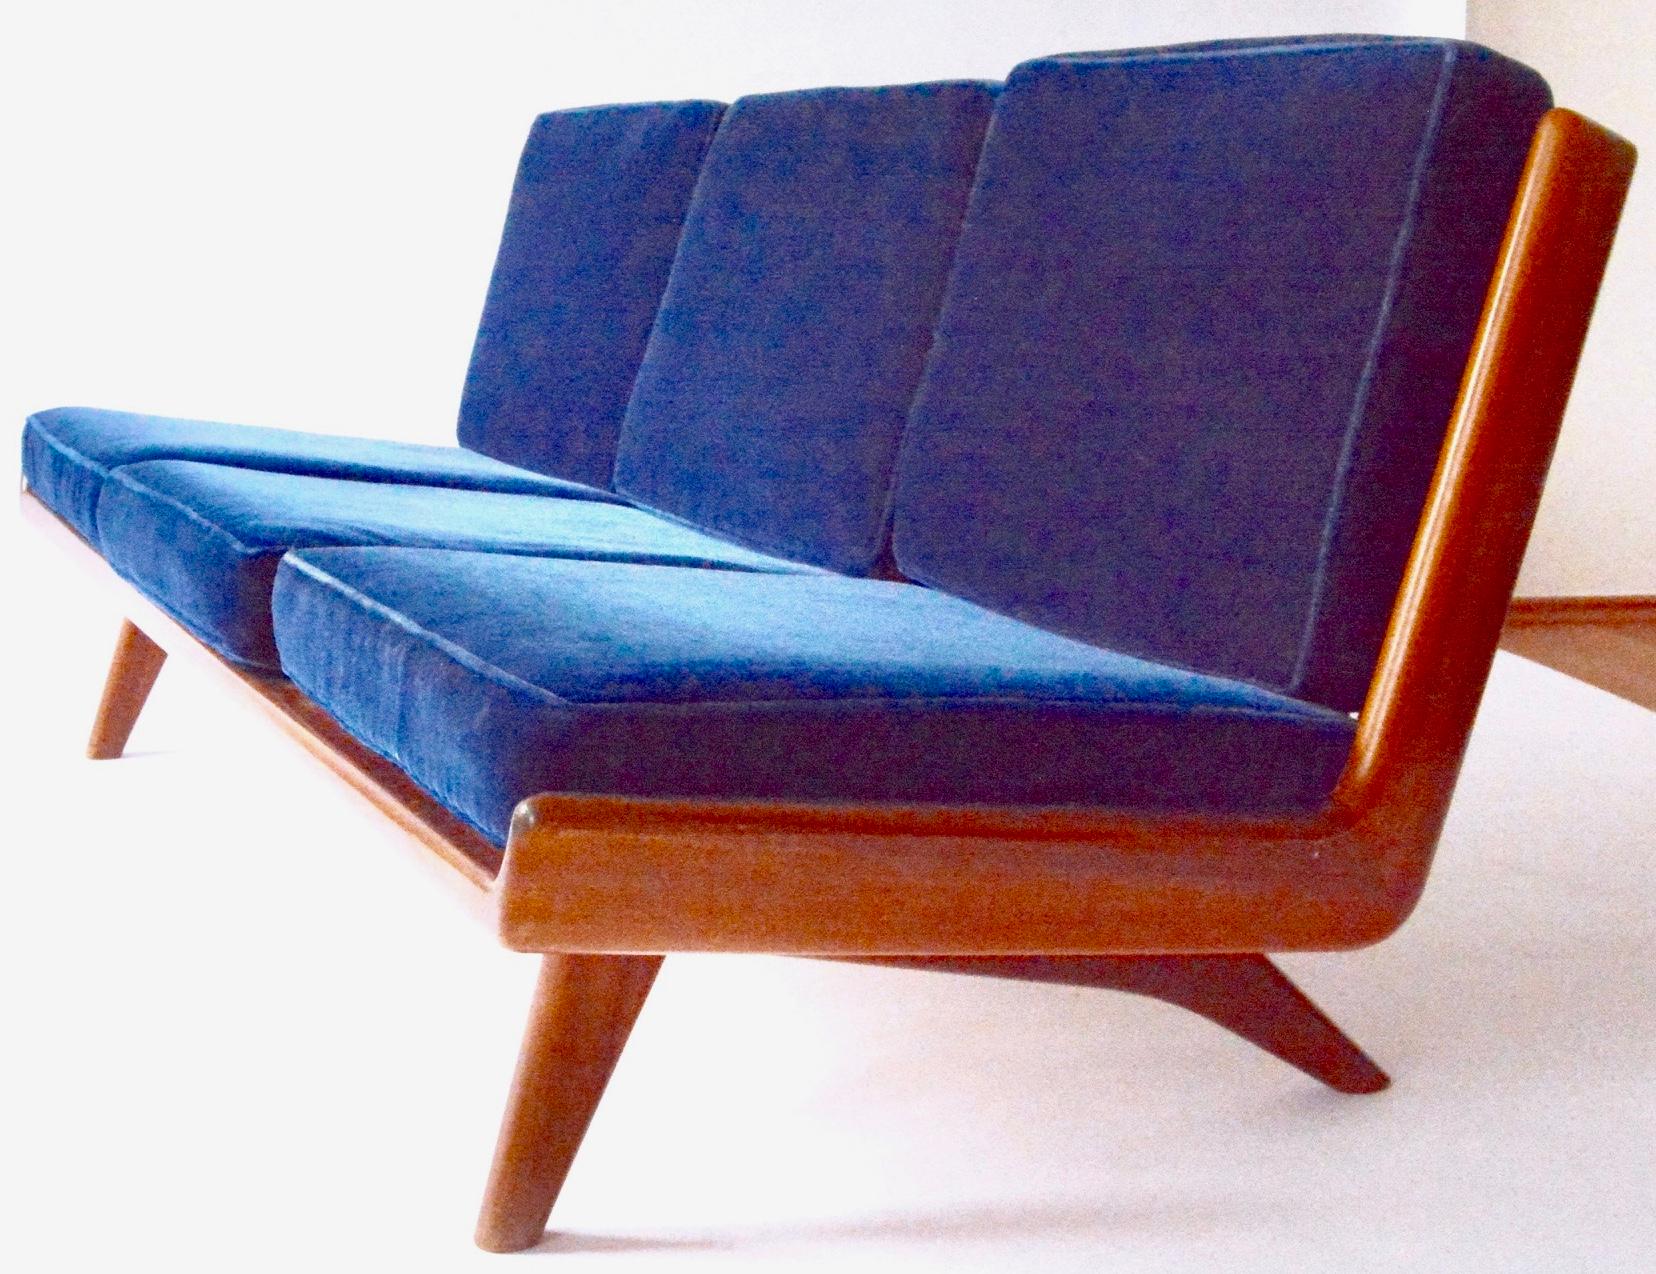 Scandinavian Modern Sofa by Carl Gustav Hiort af Ornäs for Puunveisto OY, Finland, 1950s For Sale